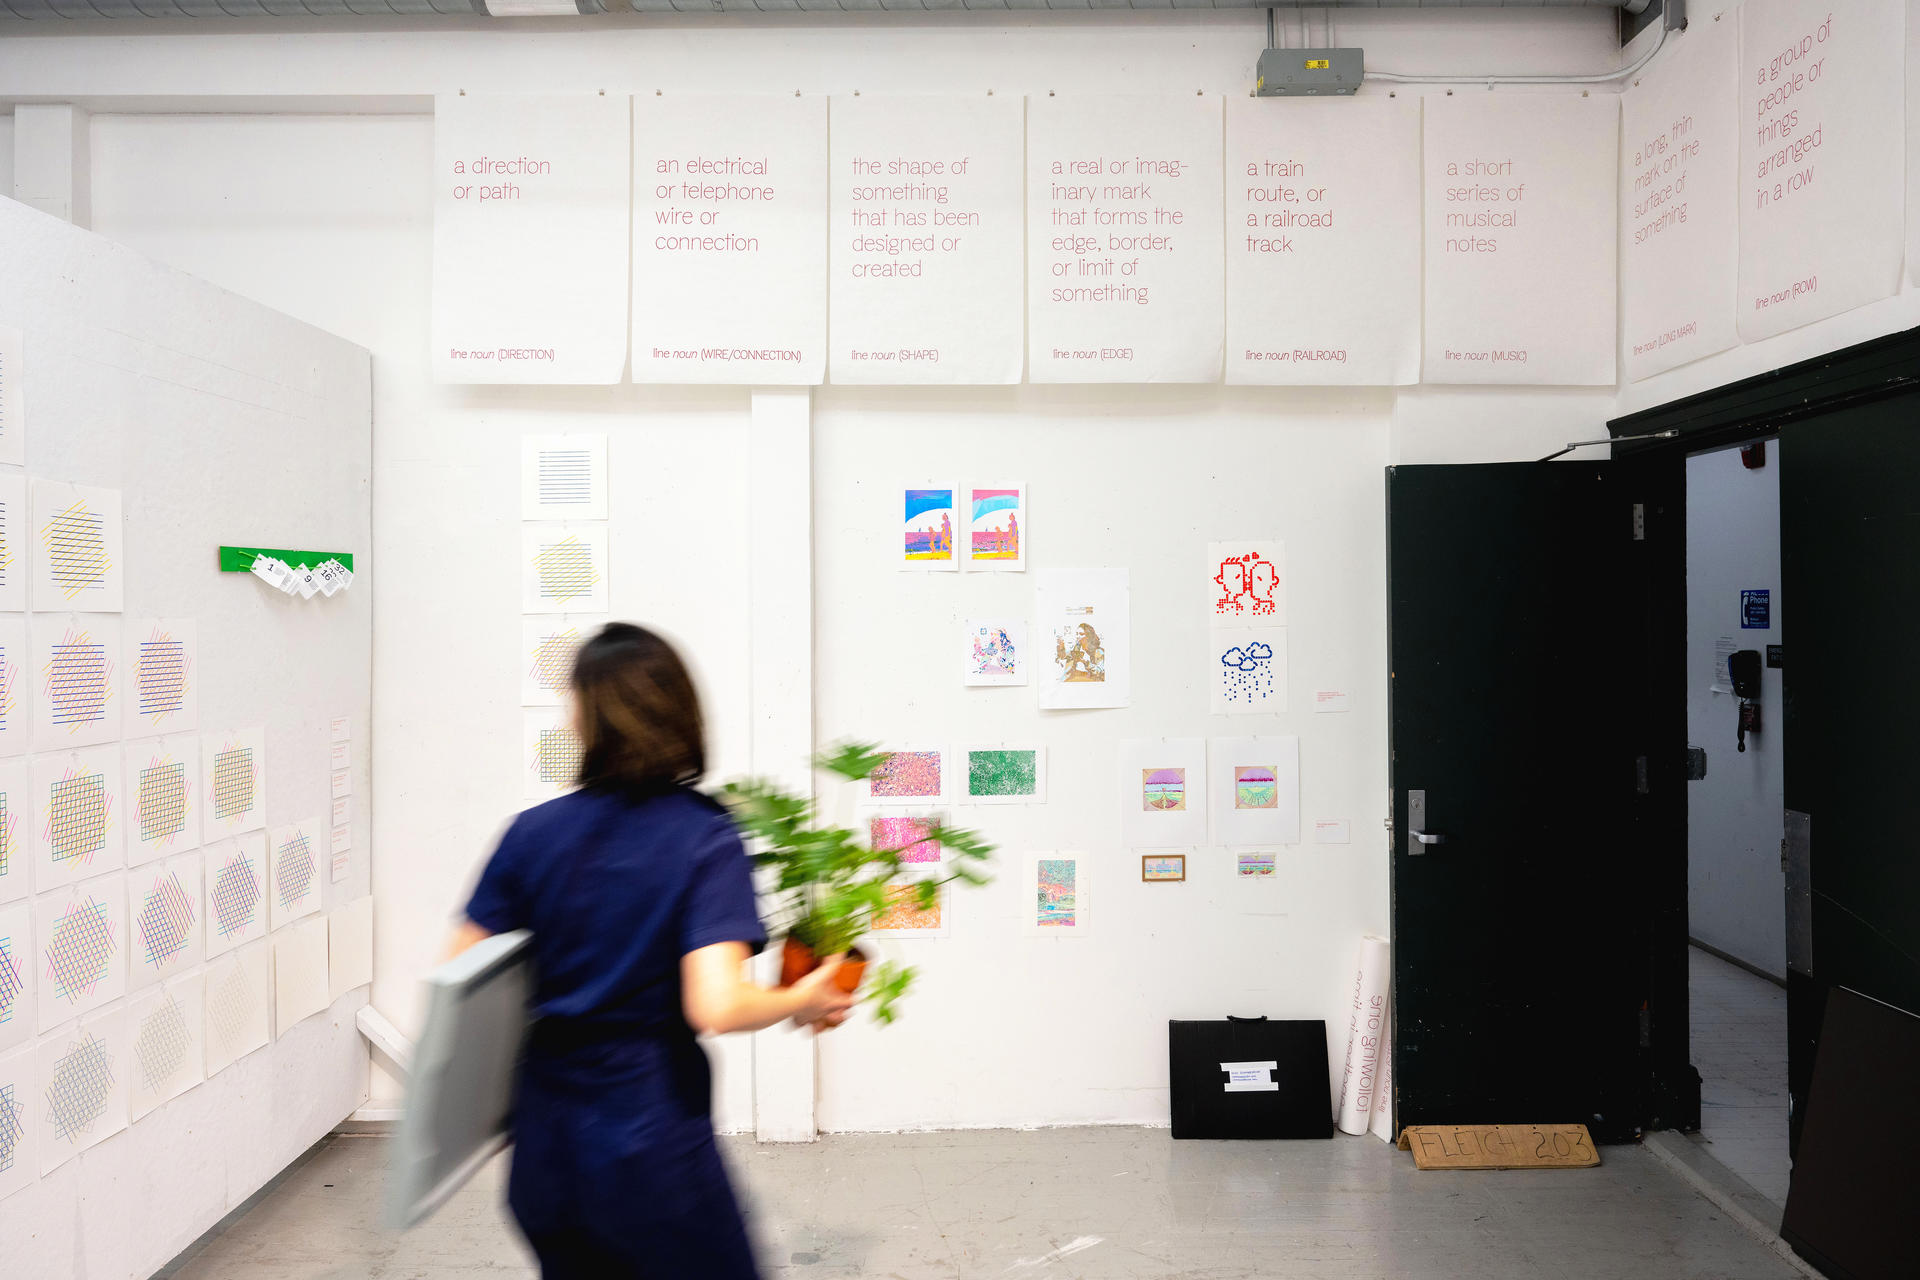 A room with a variety of small-scale works pinned to white walls. A person in motion blur walks in front of it, carrying a plant.